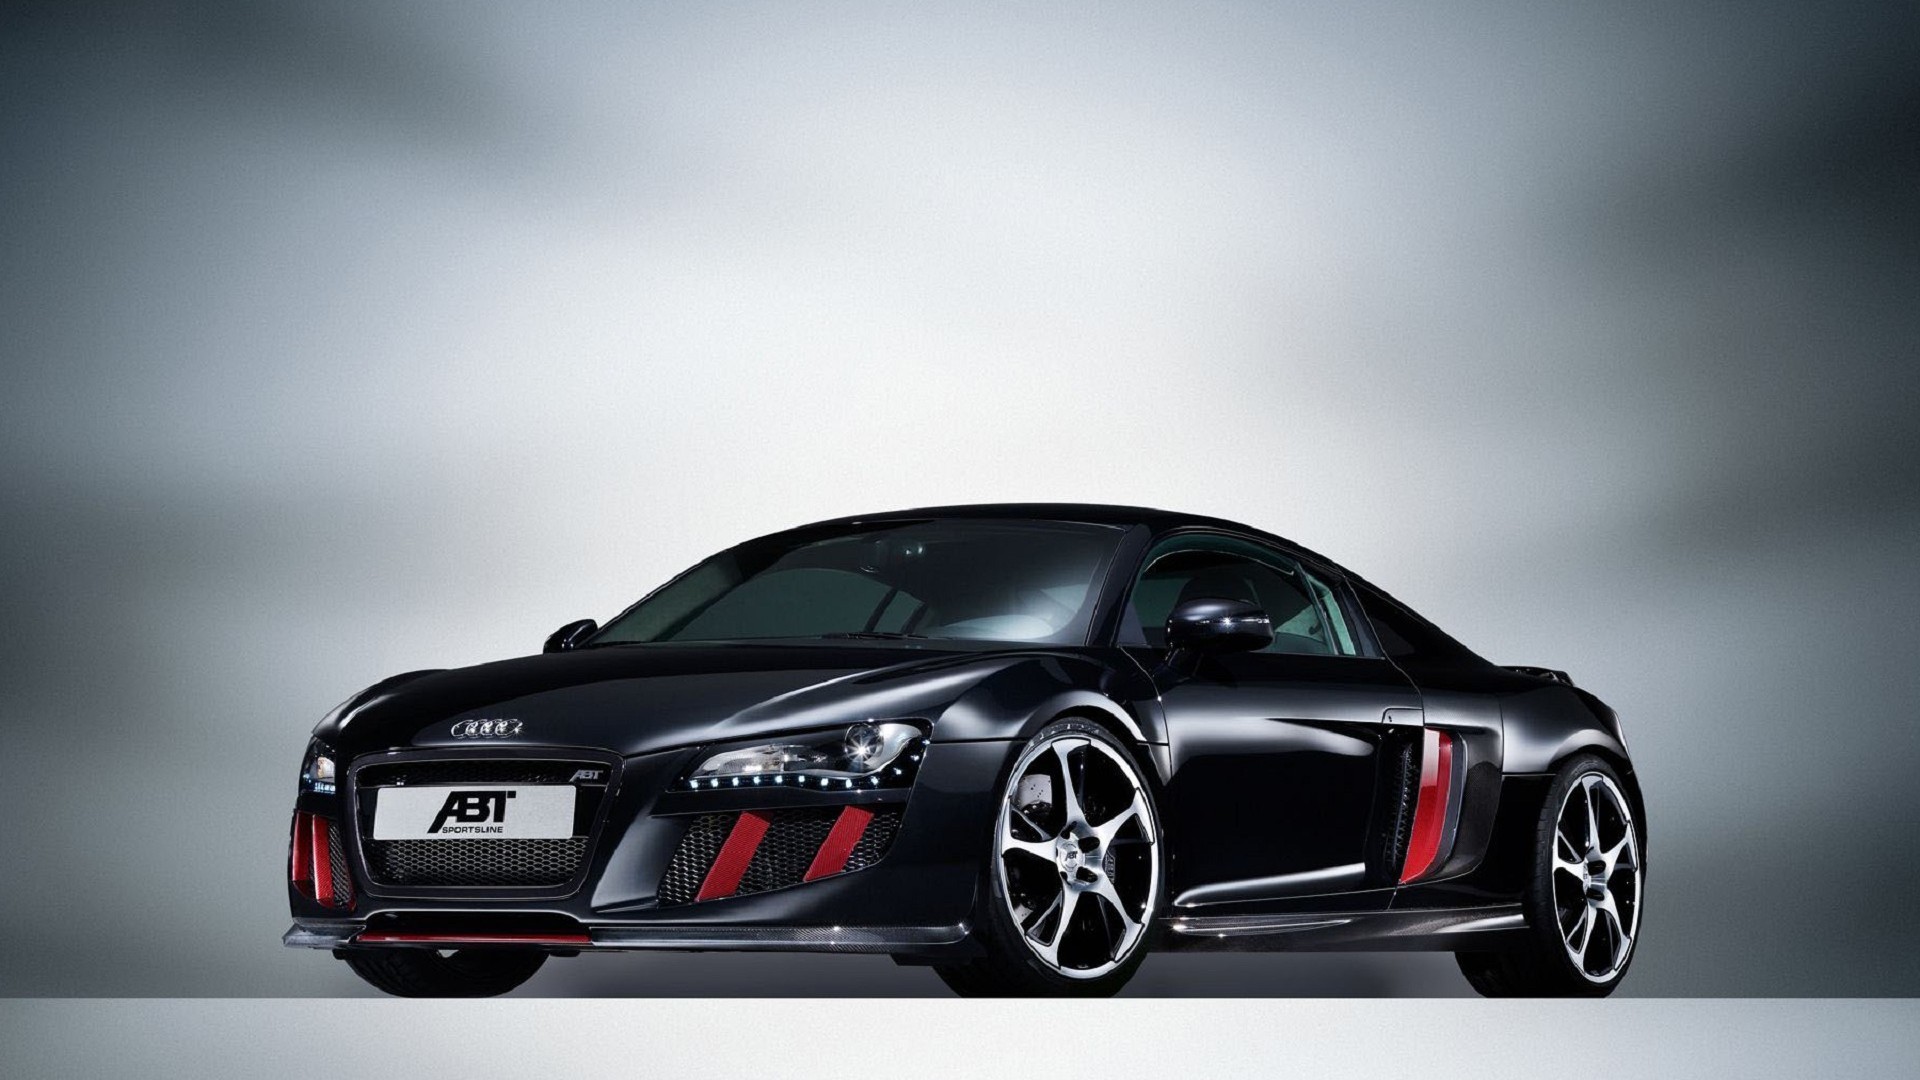 sexy moto Audi r8 Wallpapers